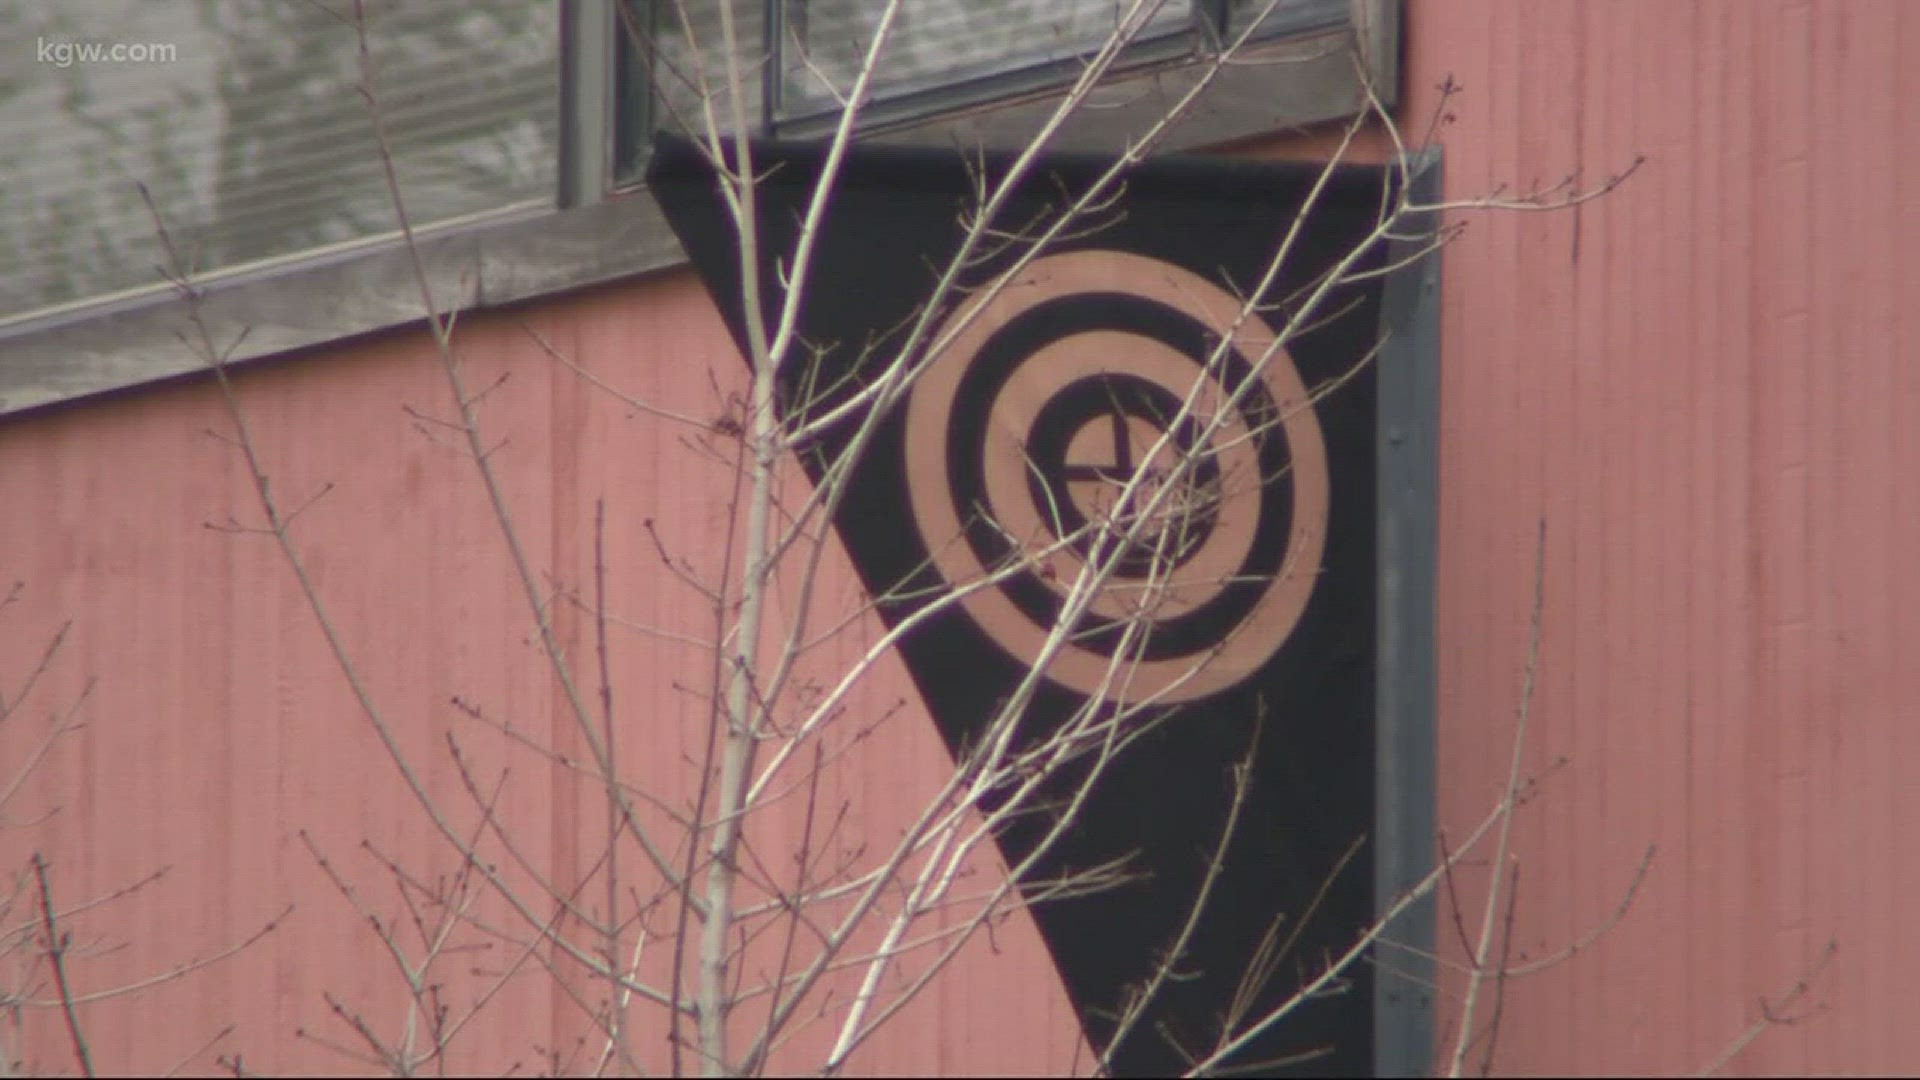 Bullseye Glass Company will pay $15,600 as part of a settlement with the Oregon DEQ.